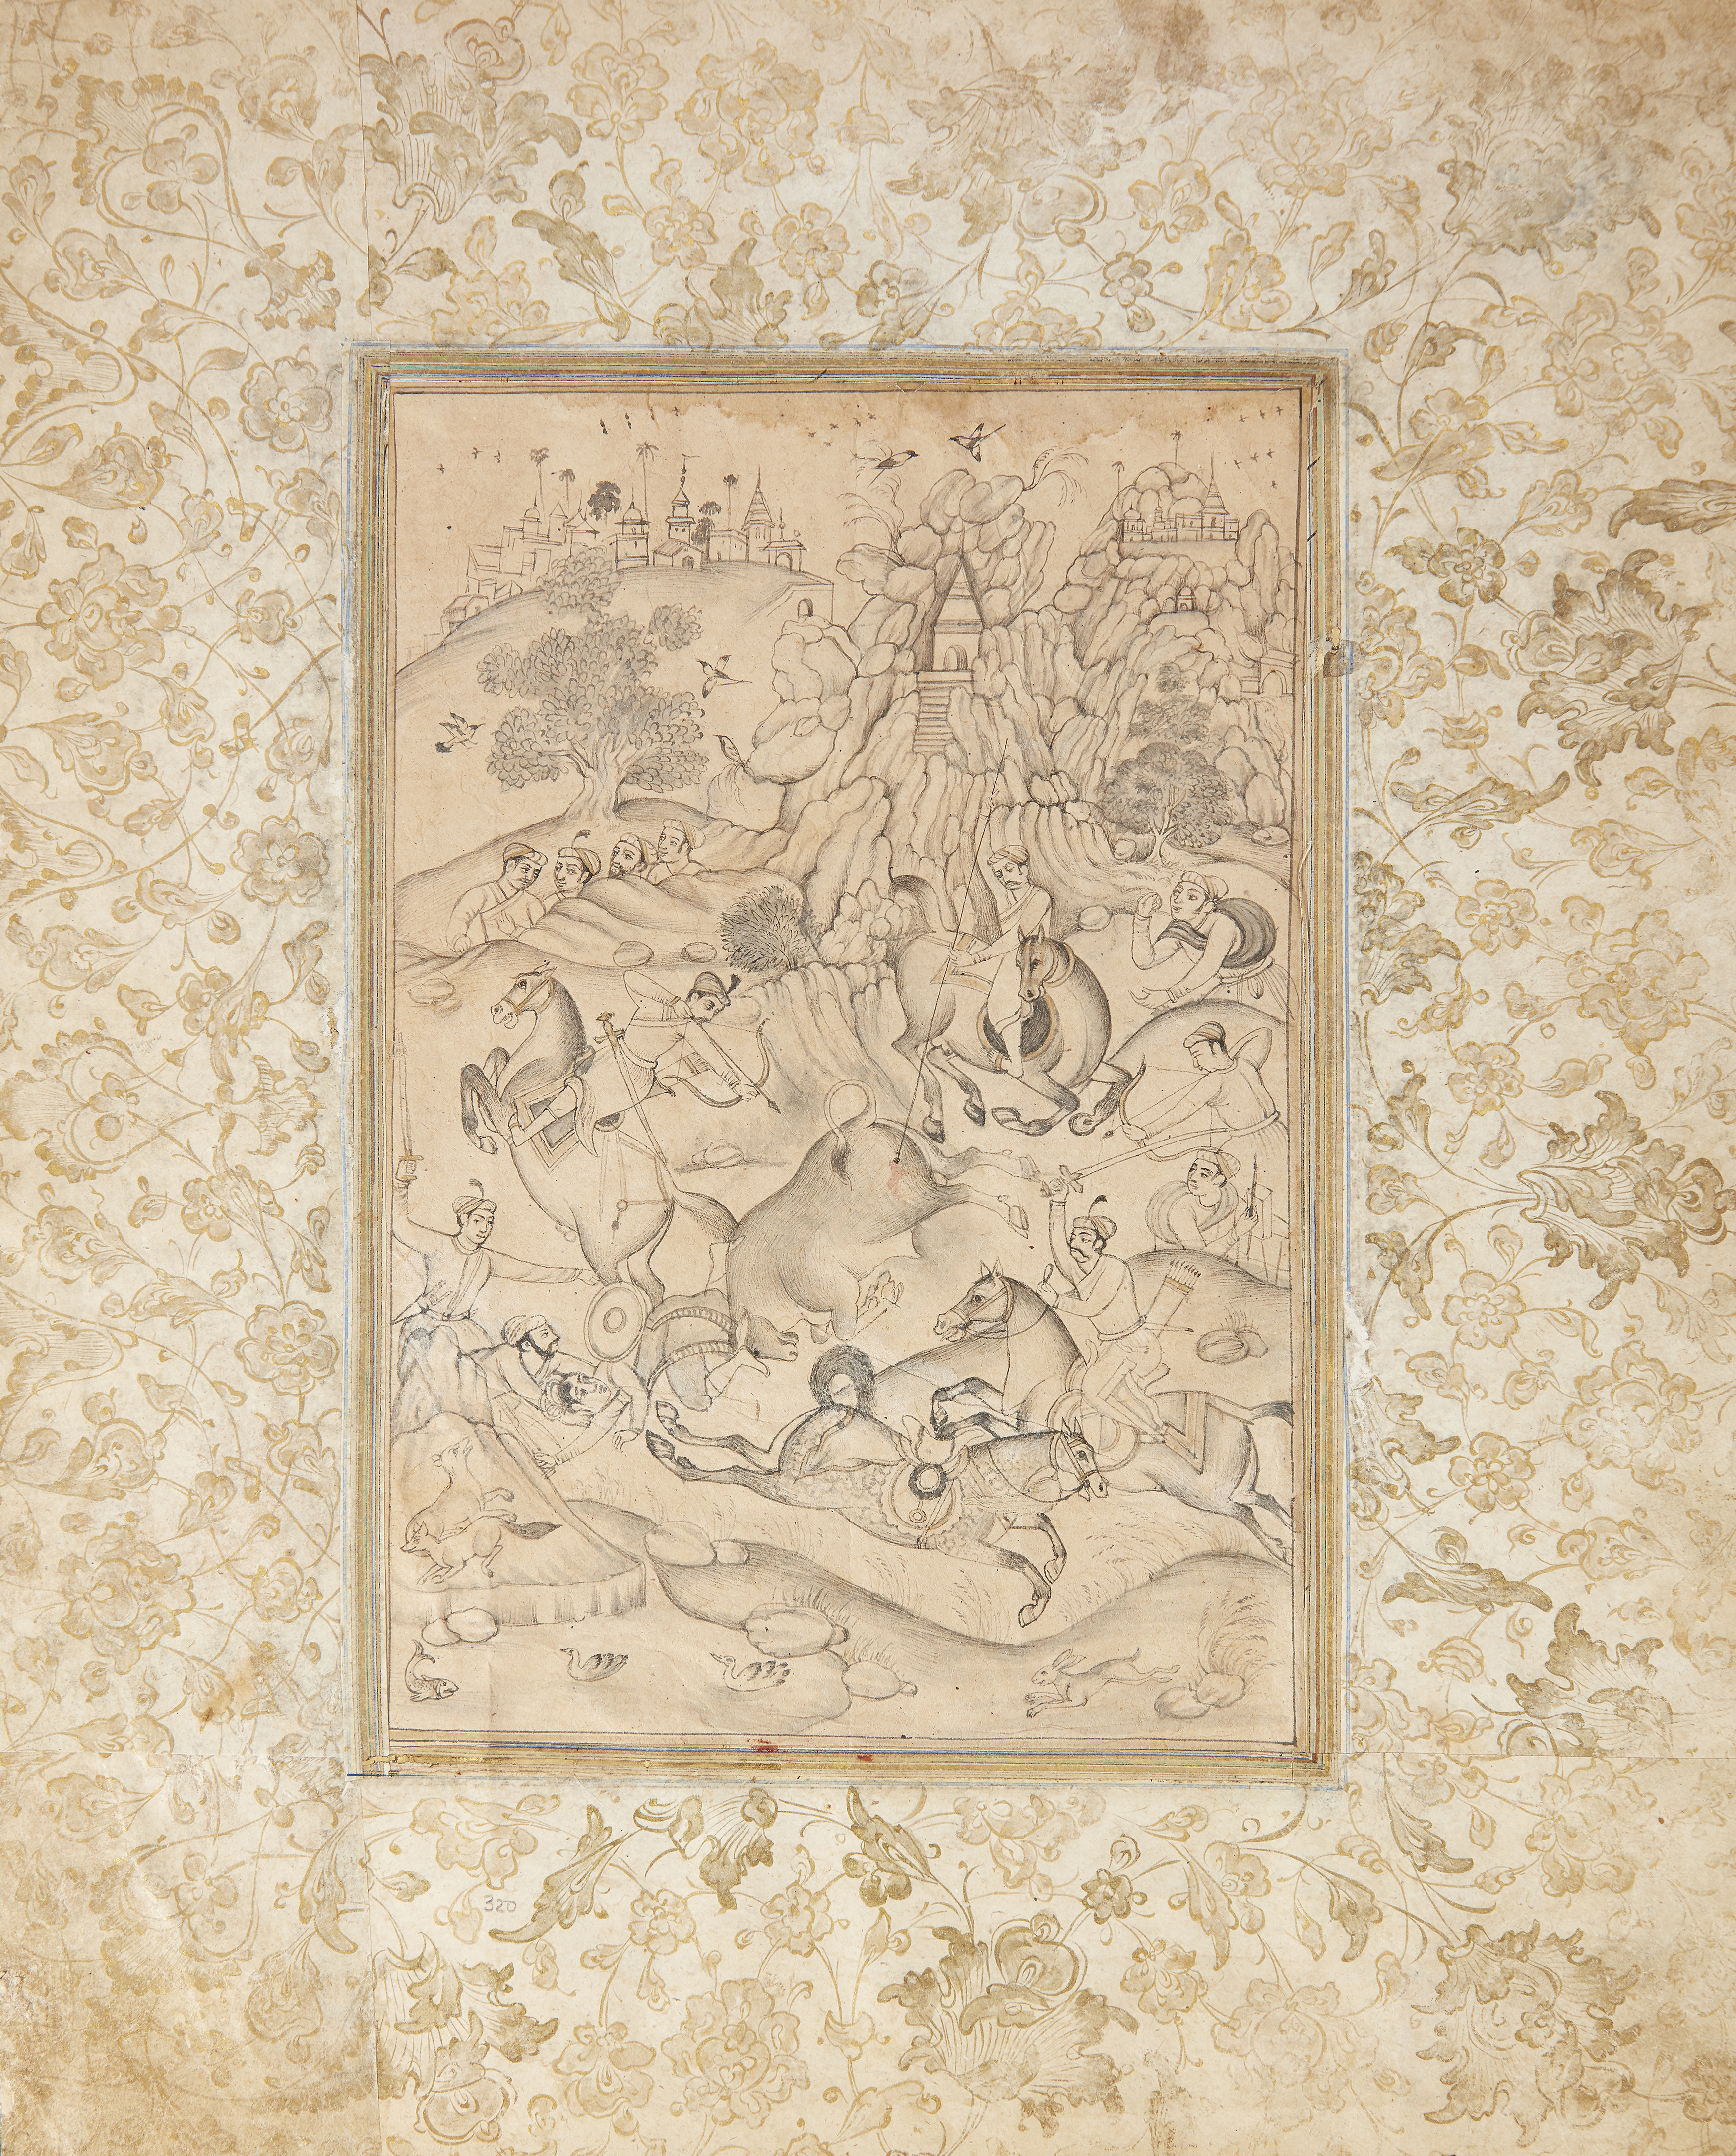 Property from an Important Private Collection Two stenciled scenes of a hunt and a calligraphic ... - Image 4 of 4